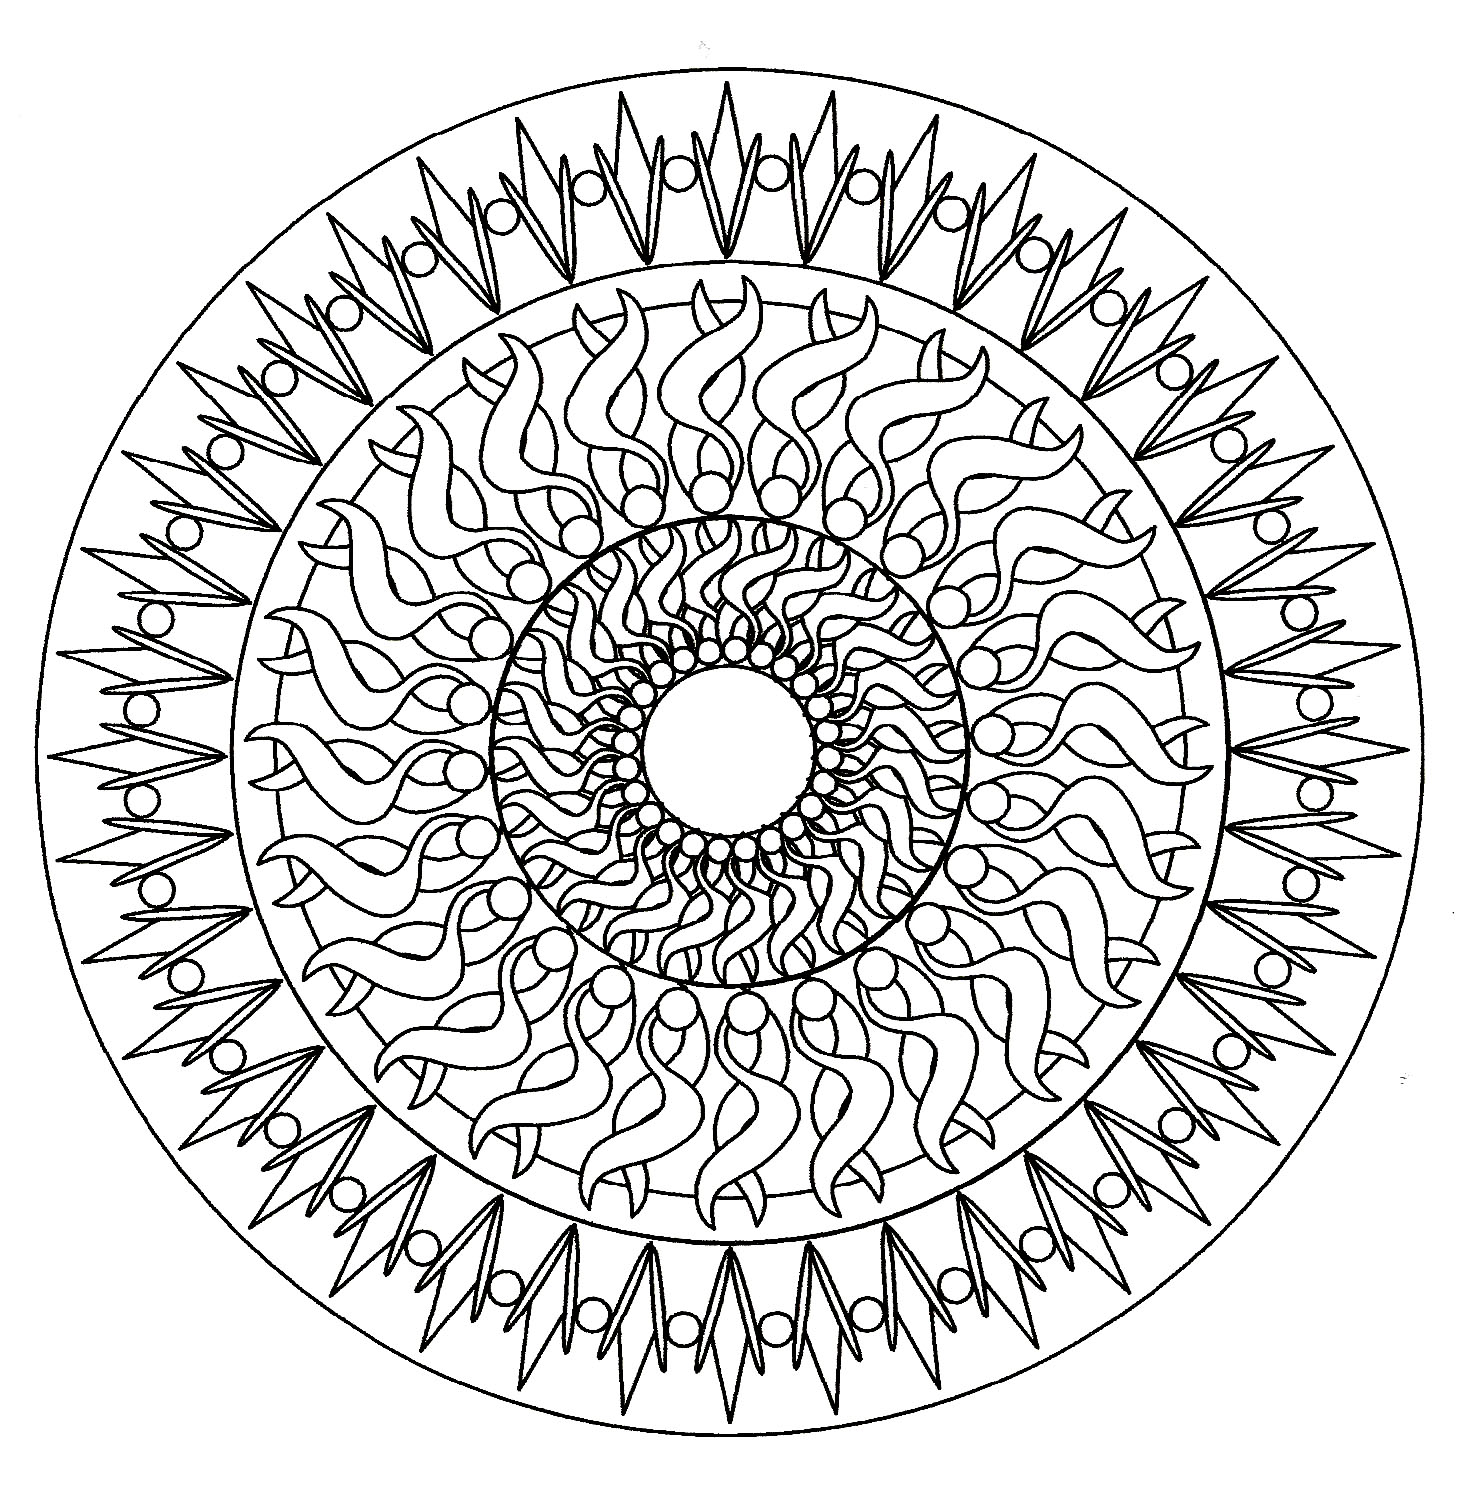 A Mandala out of the ordinary, which will allow you to spend a good time coloring, without complicating your life with too small areas, if it's not what you search for.